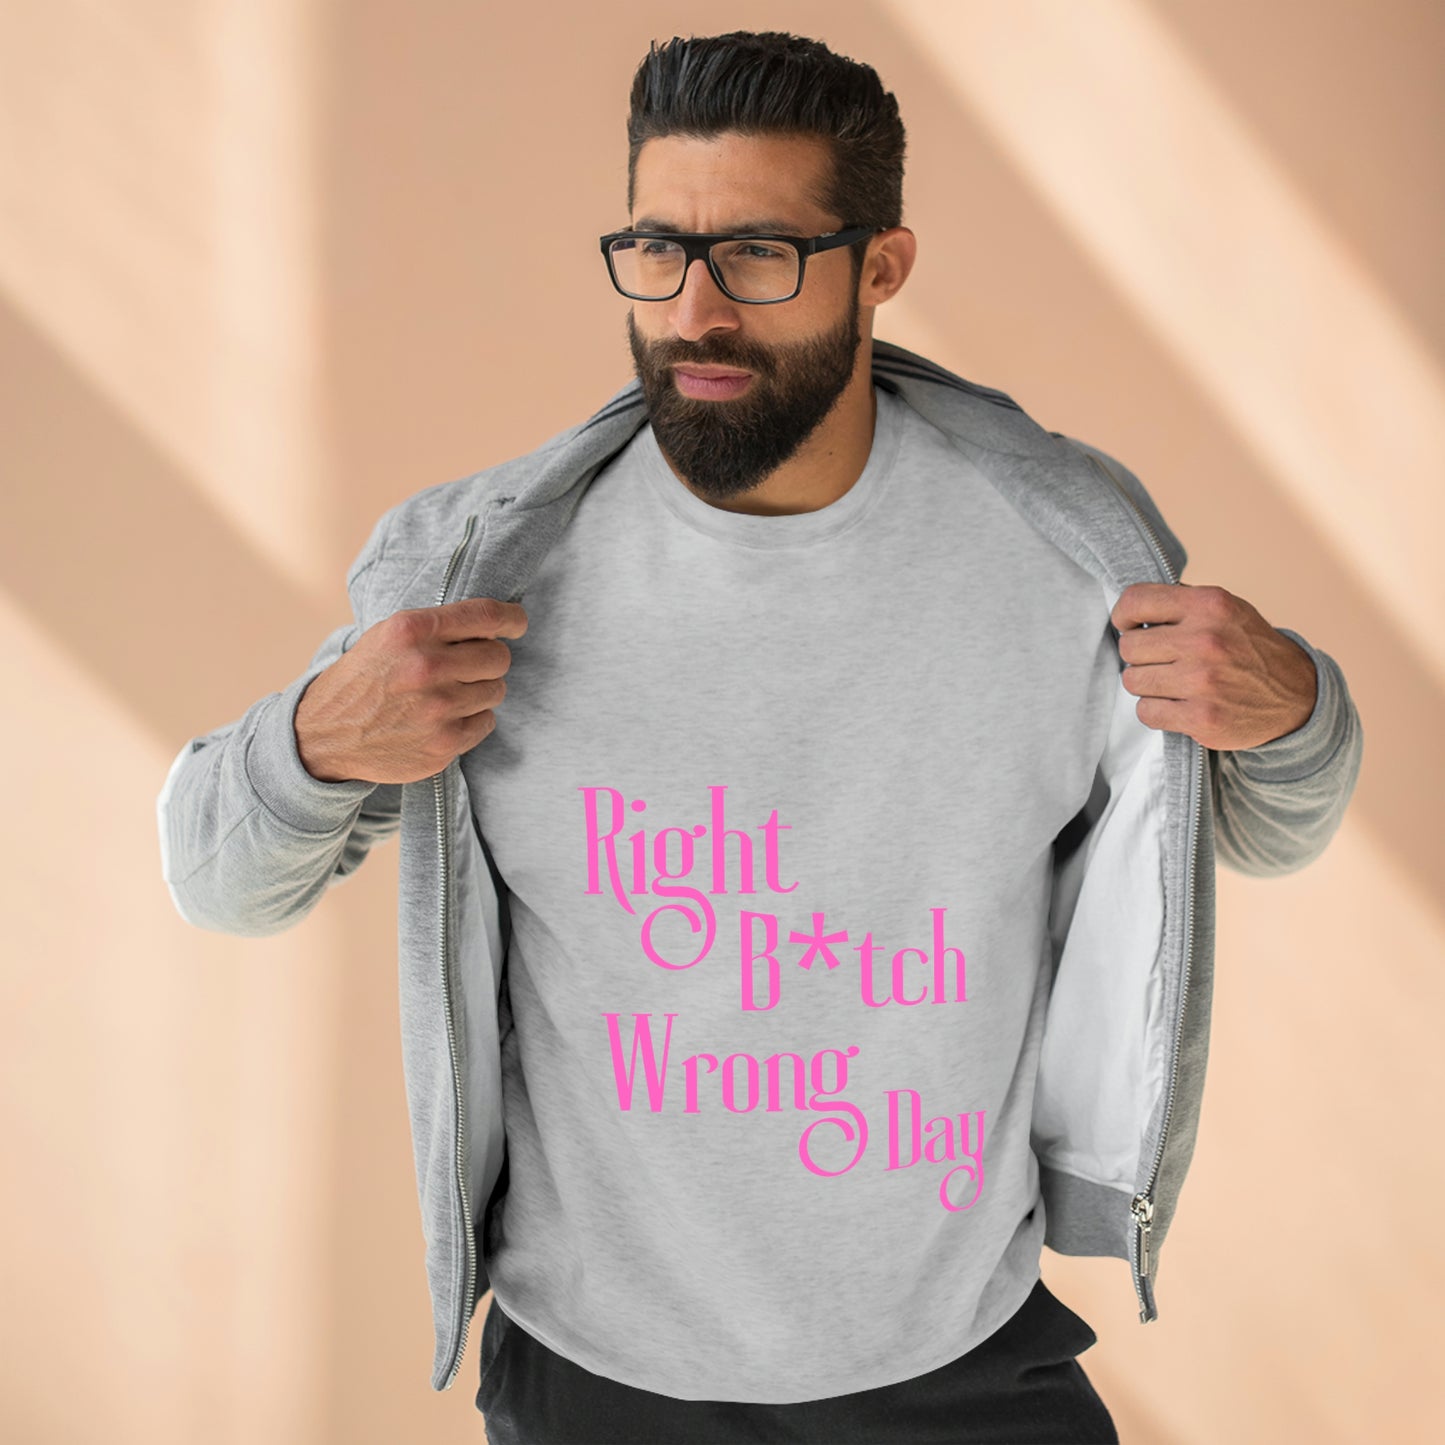 Right Day Sweater